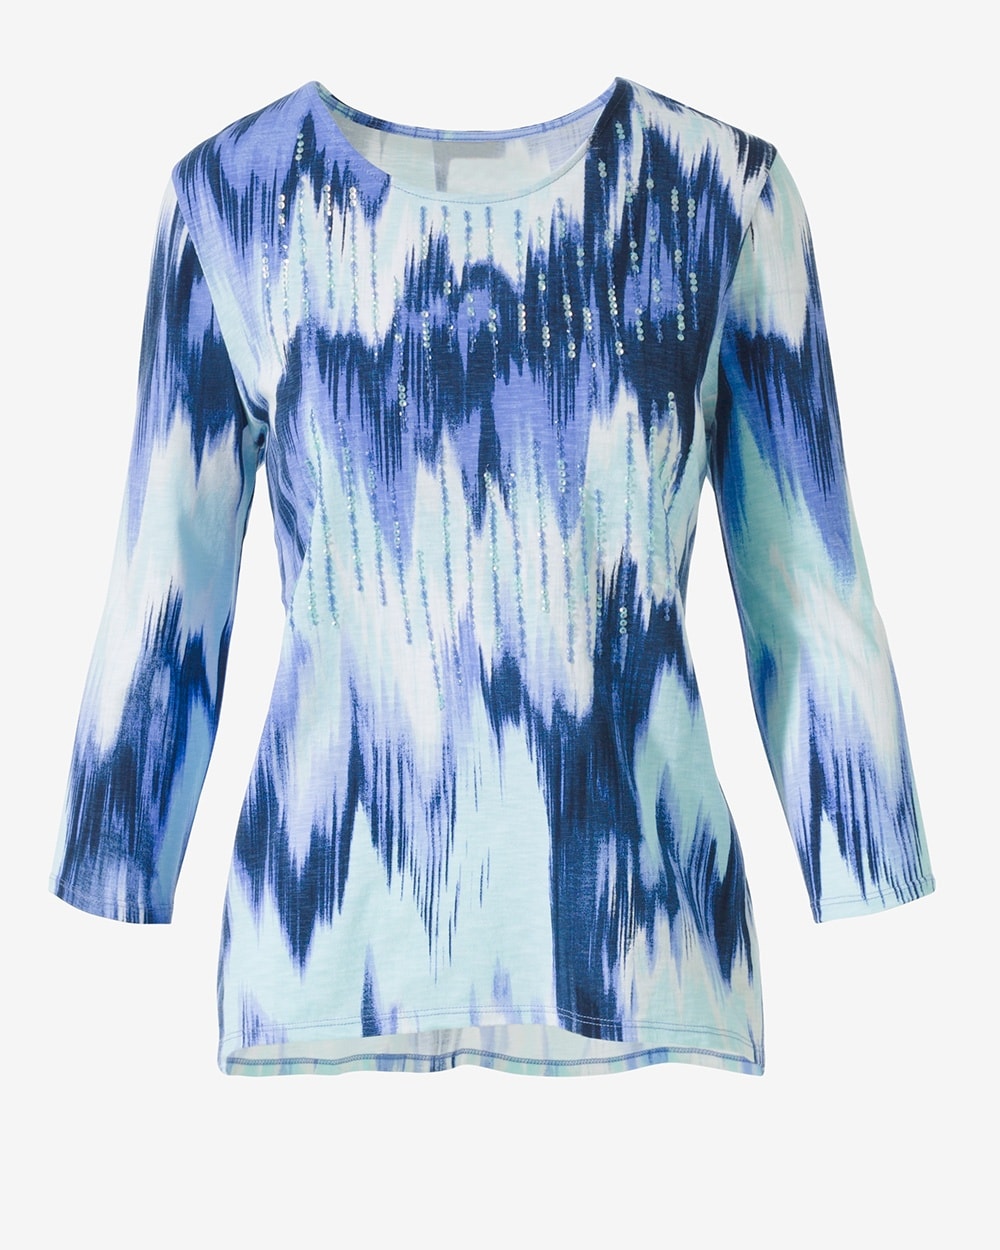 Weekends Majestic Ombre Embellished Tunic